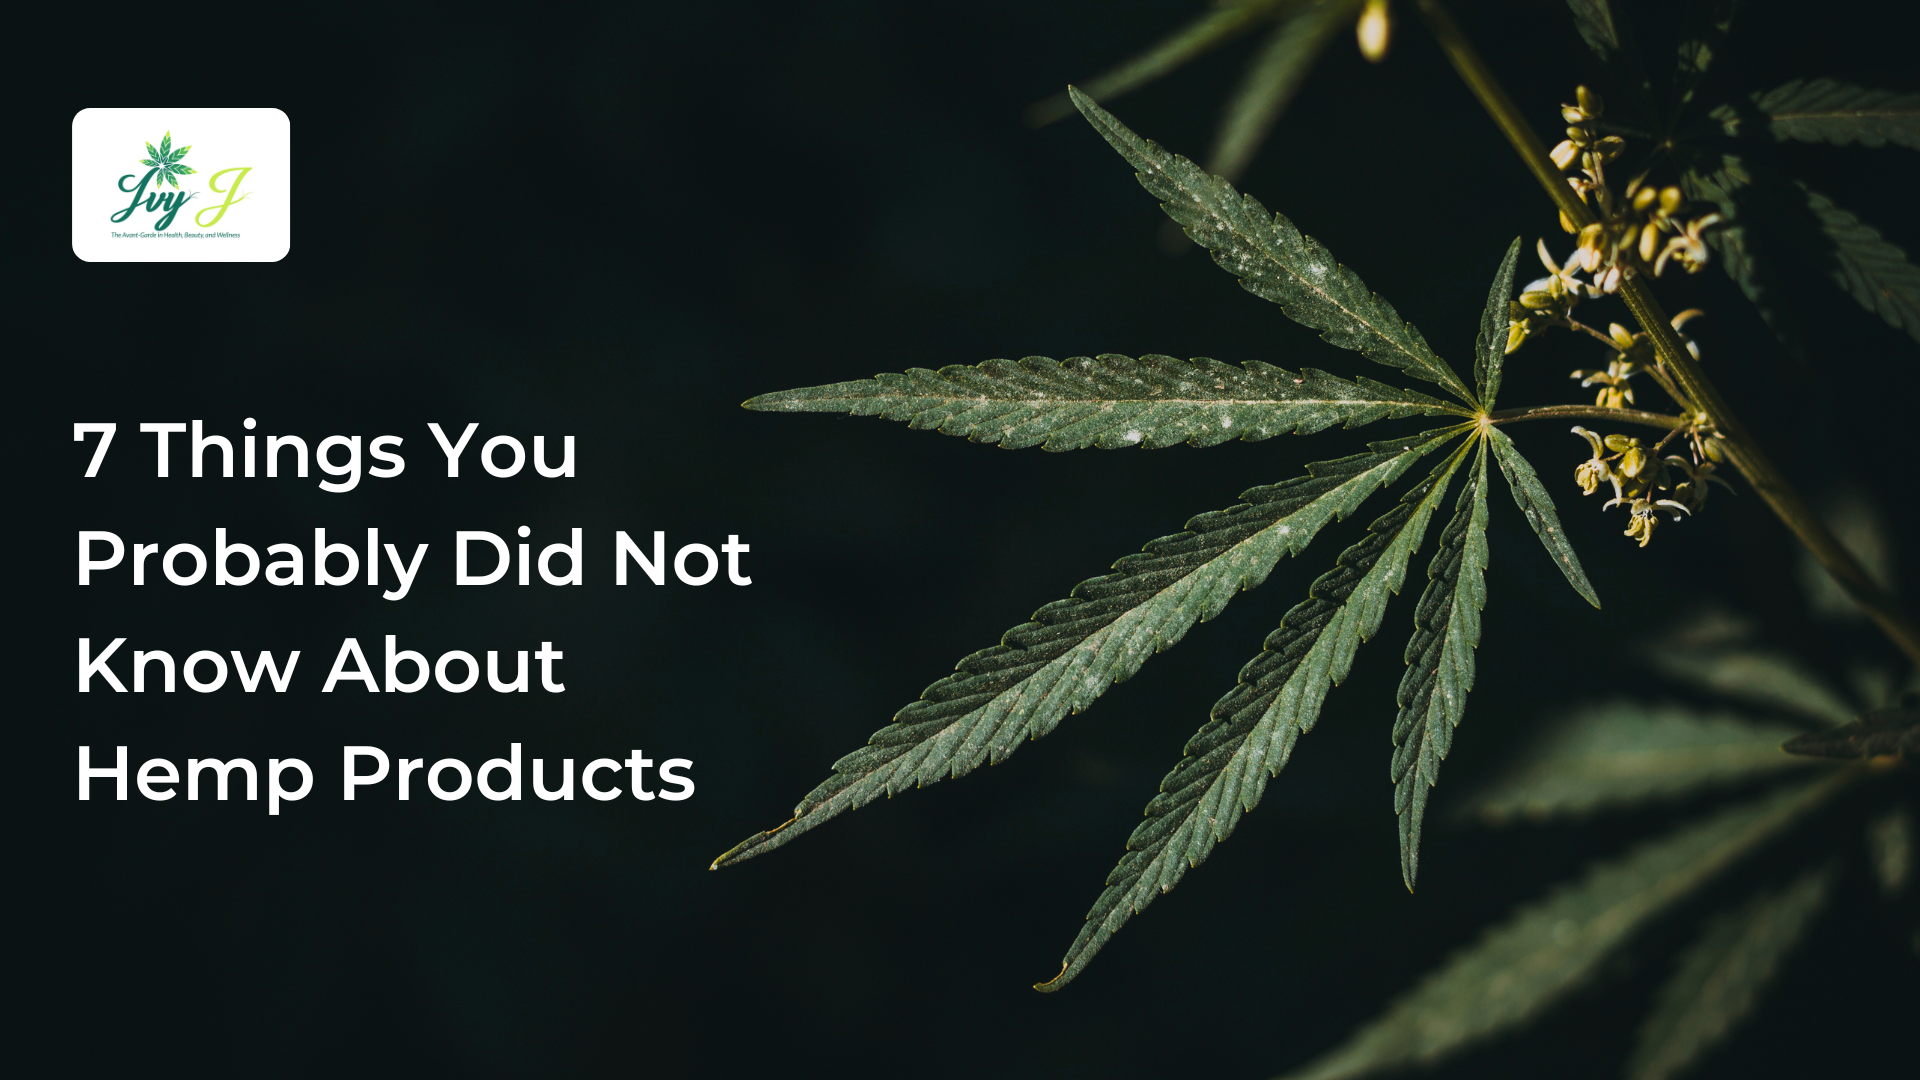 7 Things You Probably Did Not Know About Hemp Products